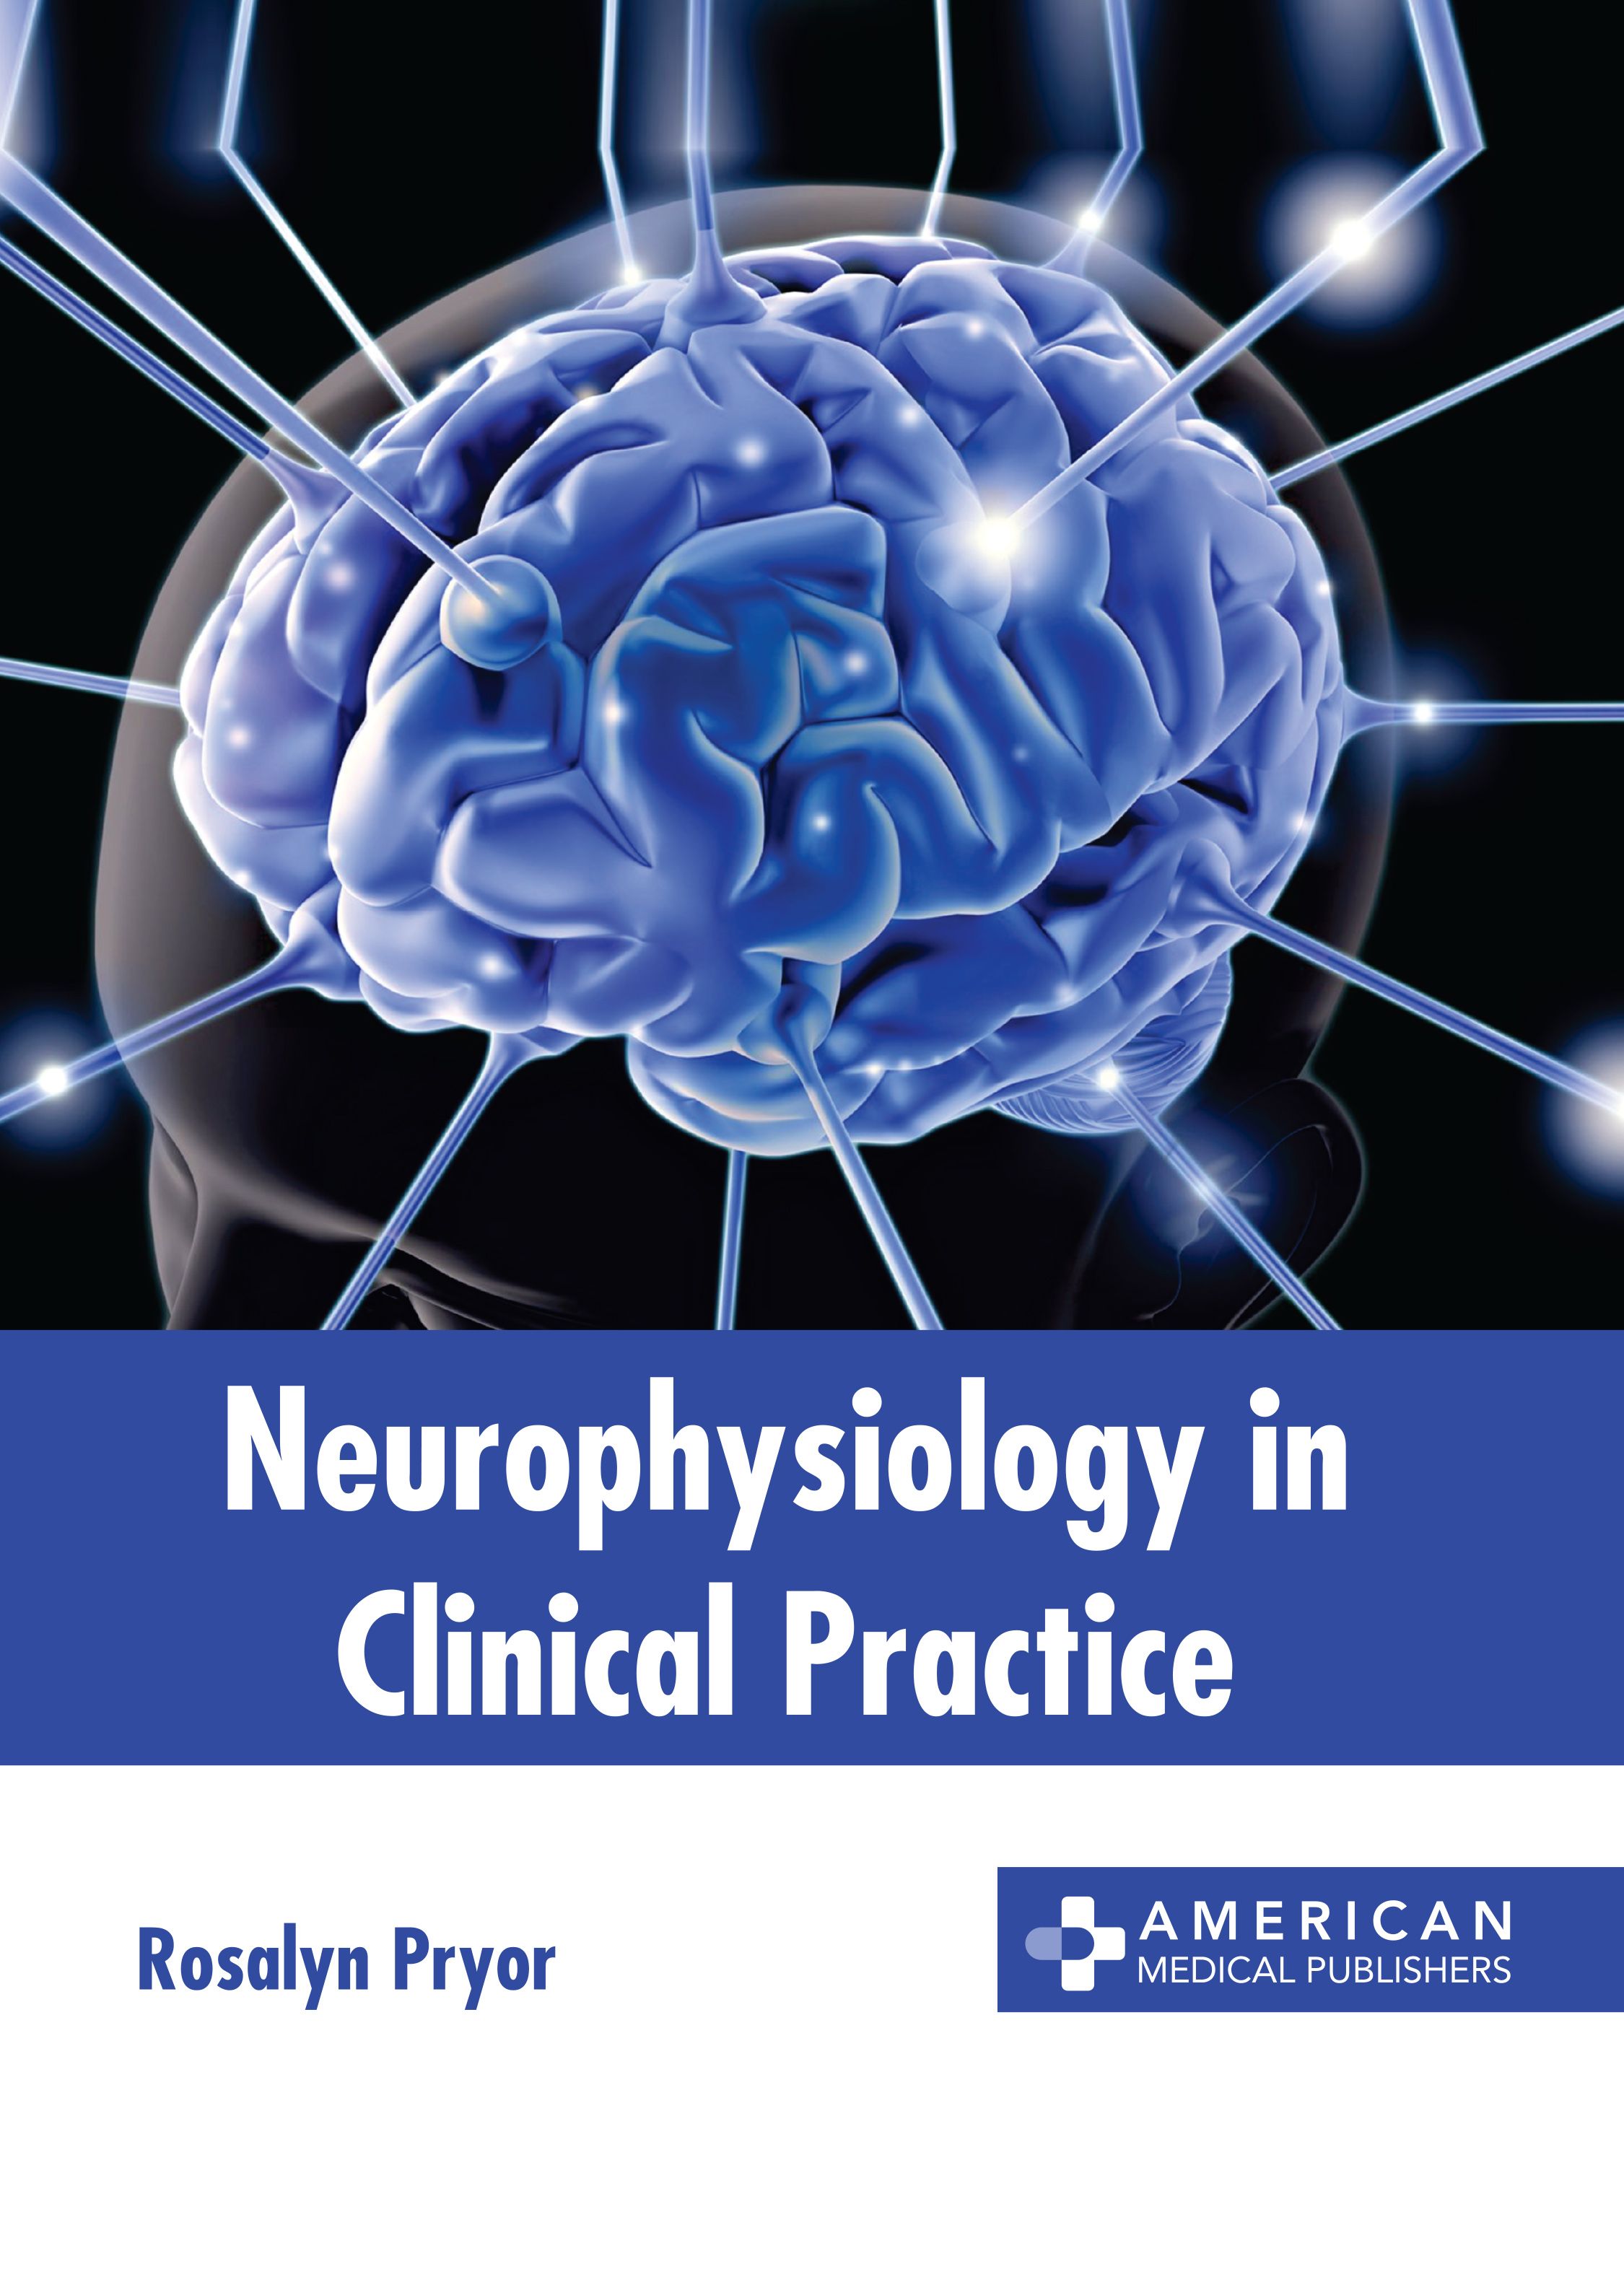 NEUROPHYSIOLOGY IN CLINICAL PRACTICE